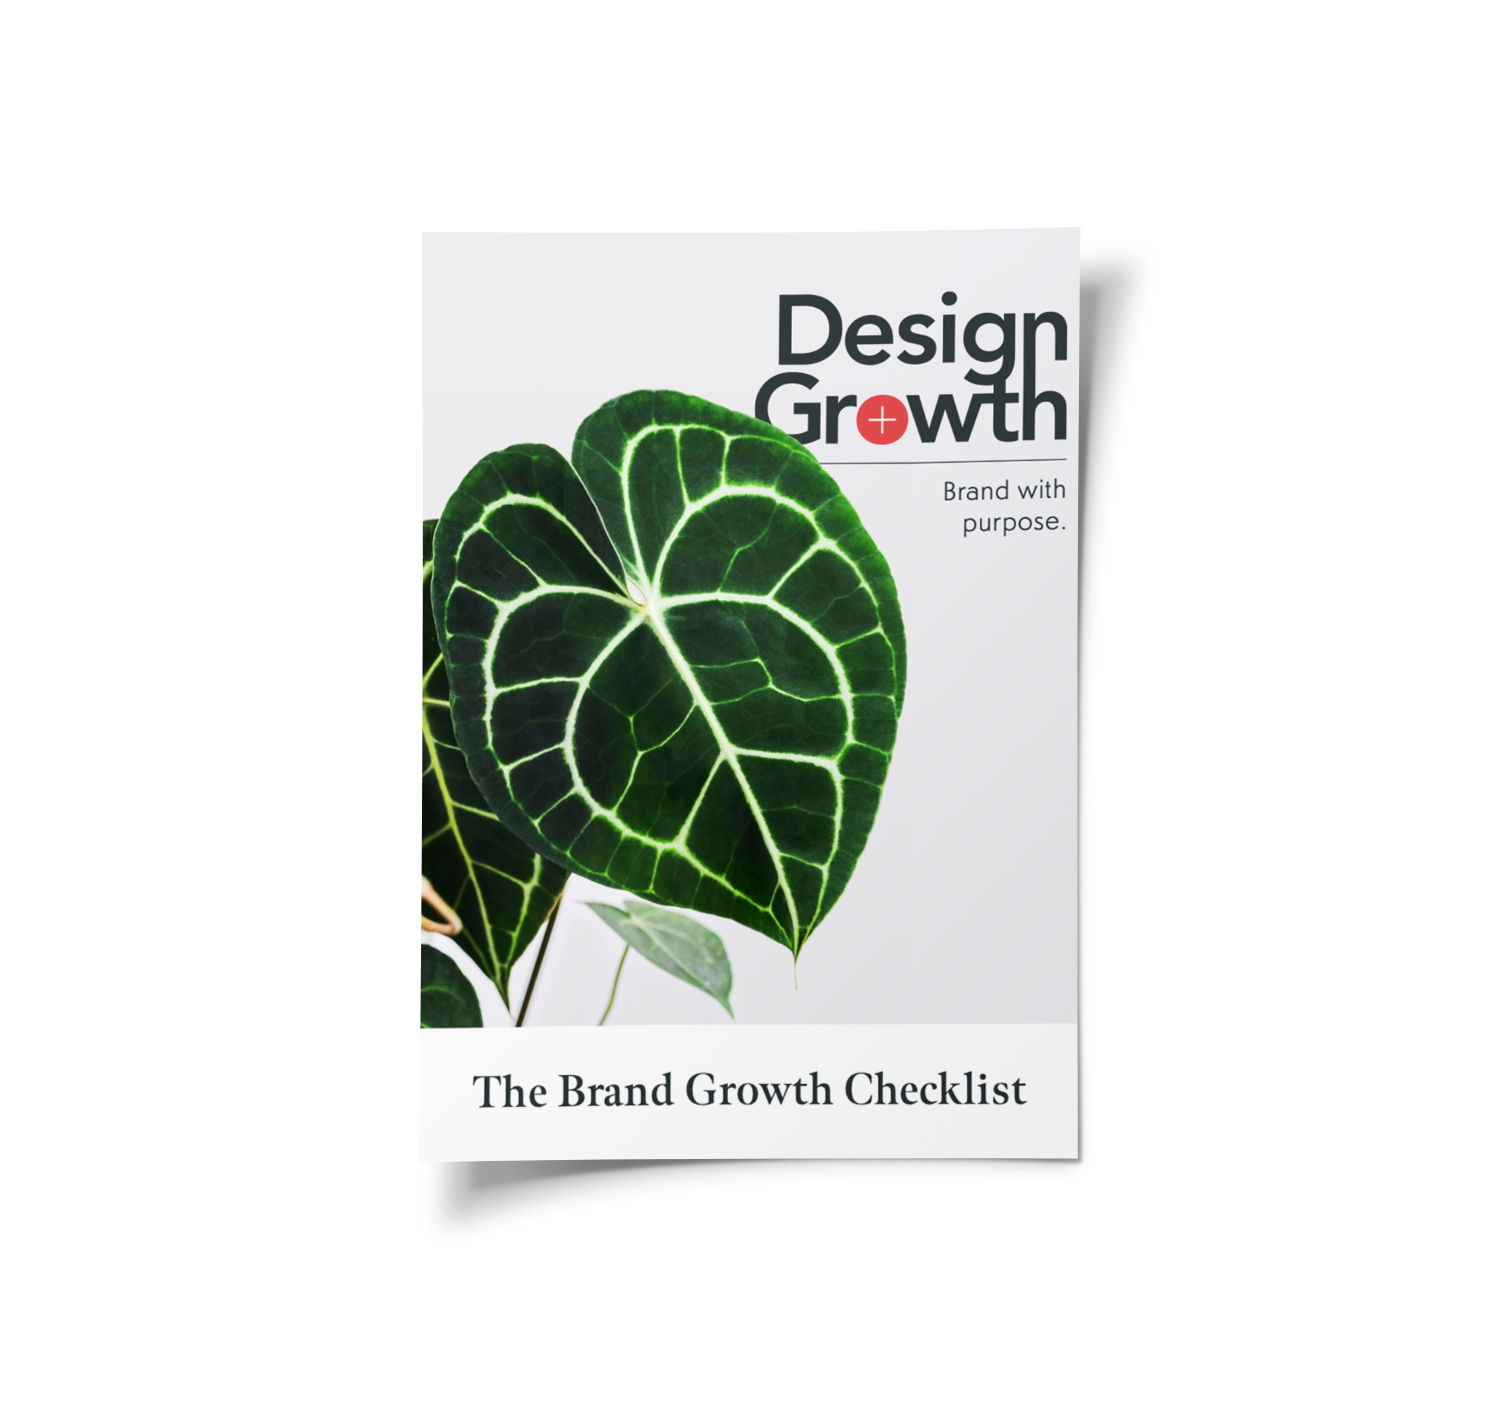 Cover of checklist has the title "Design Growth," and a lush, healthy plant. 